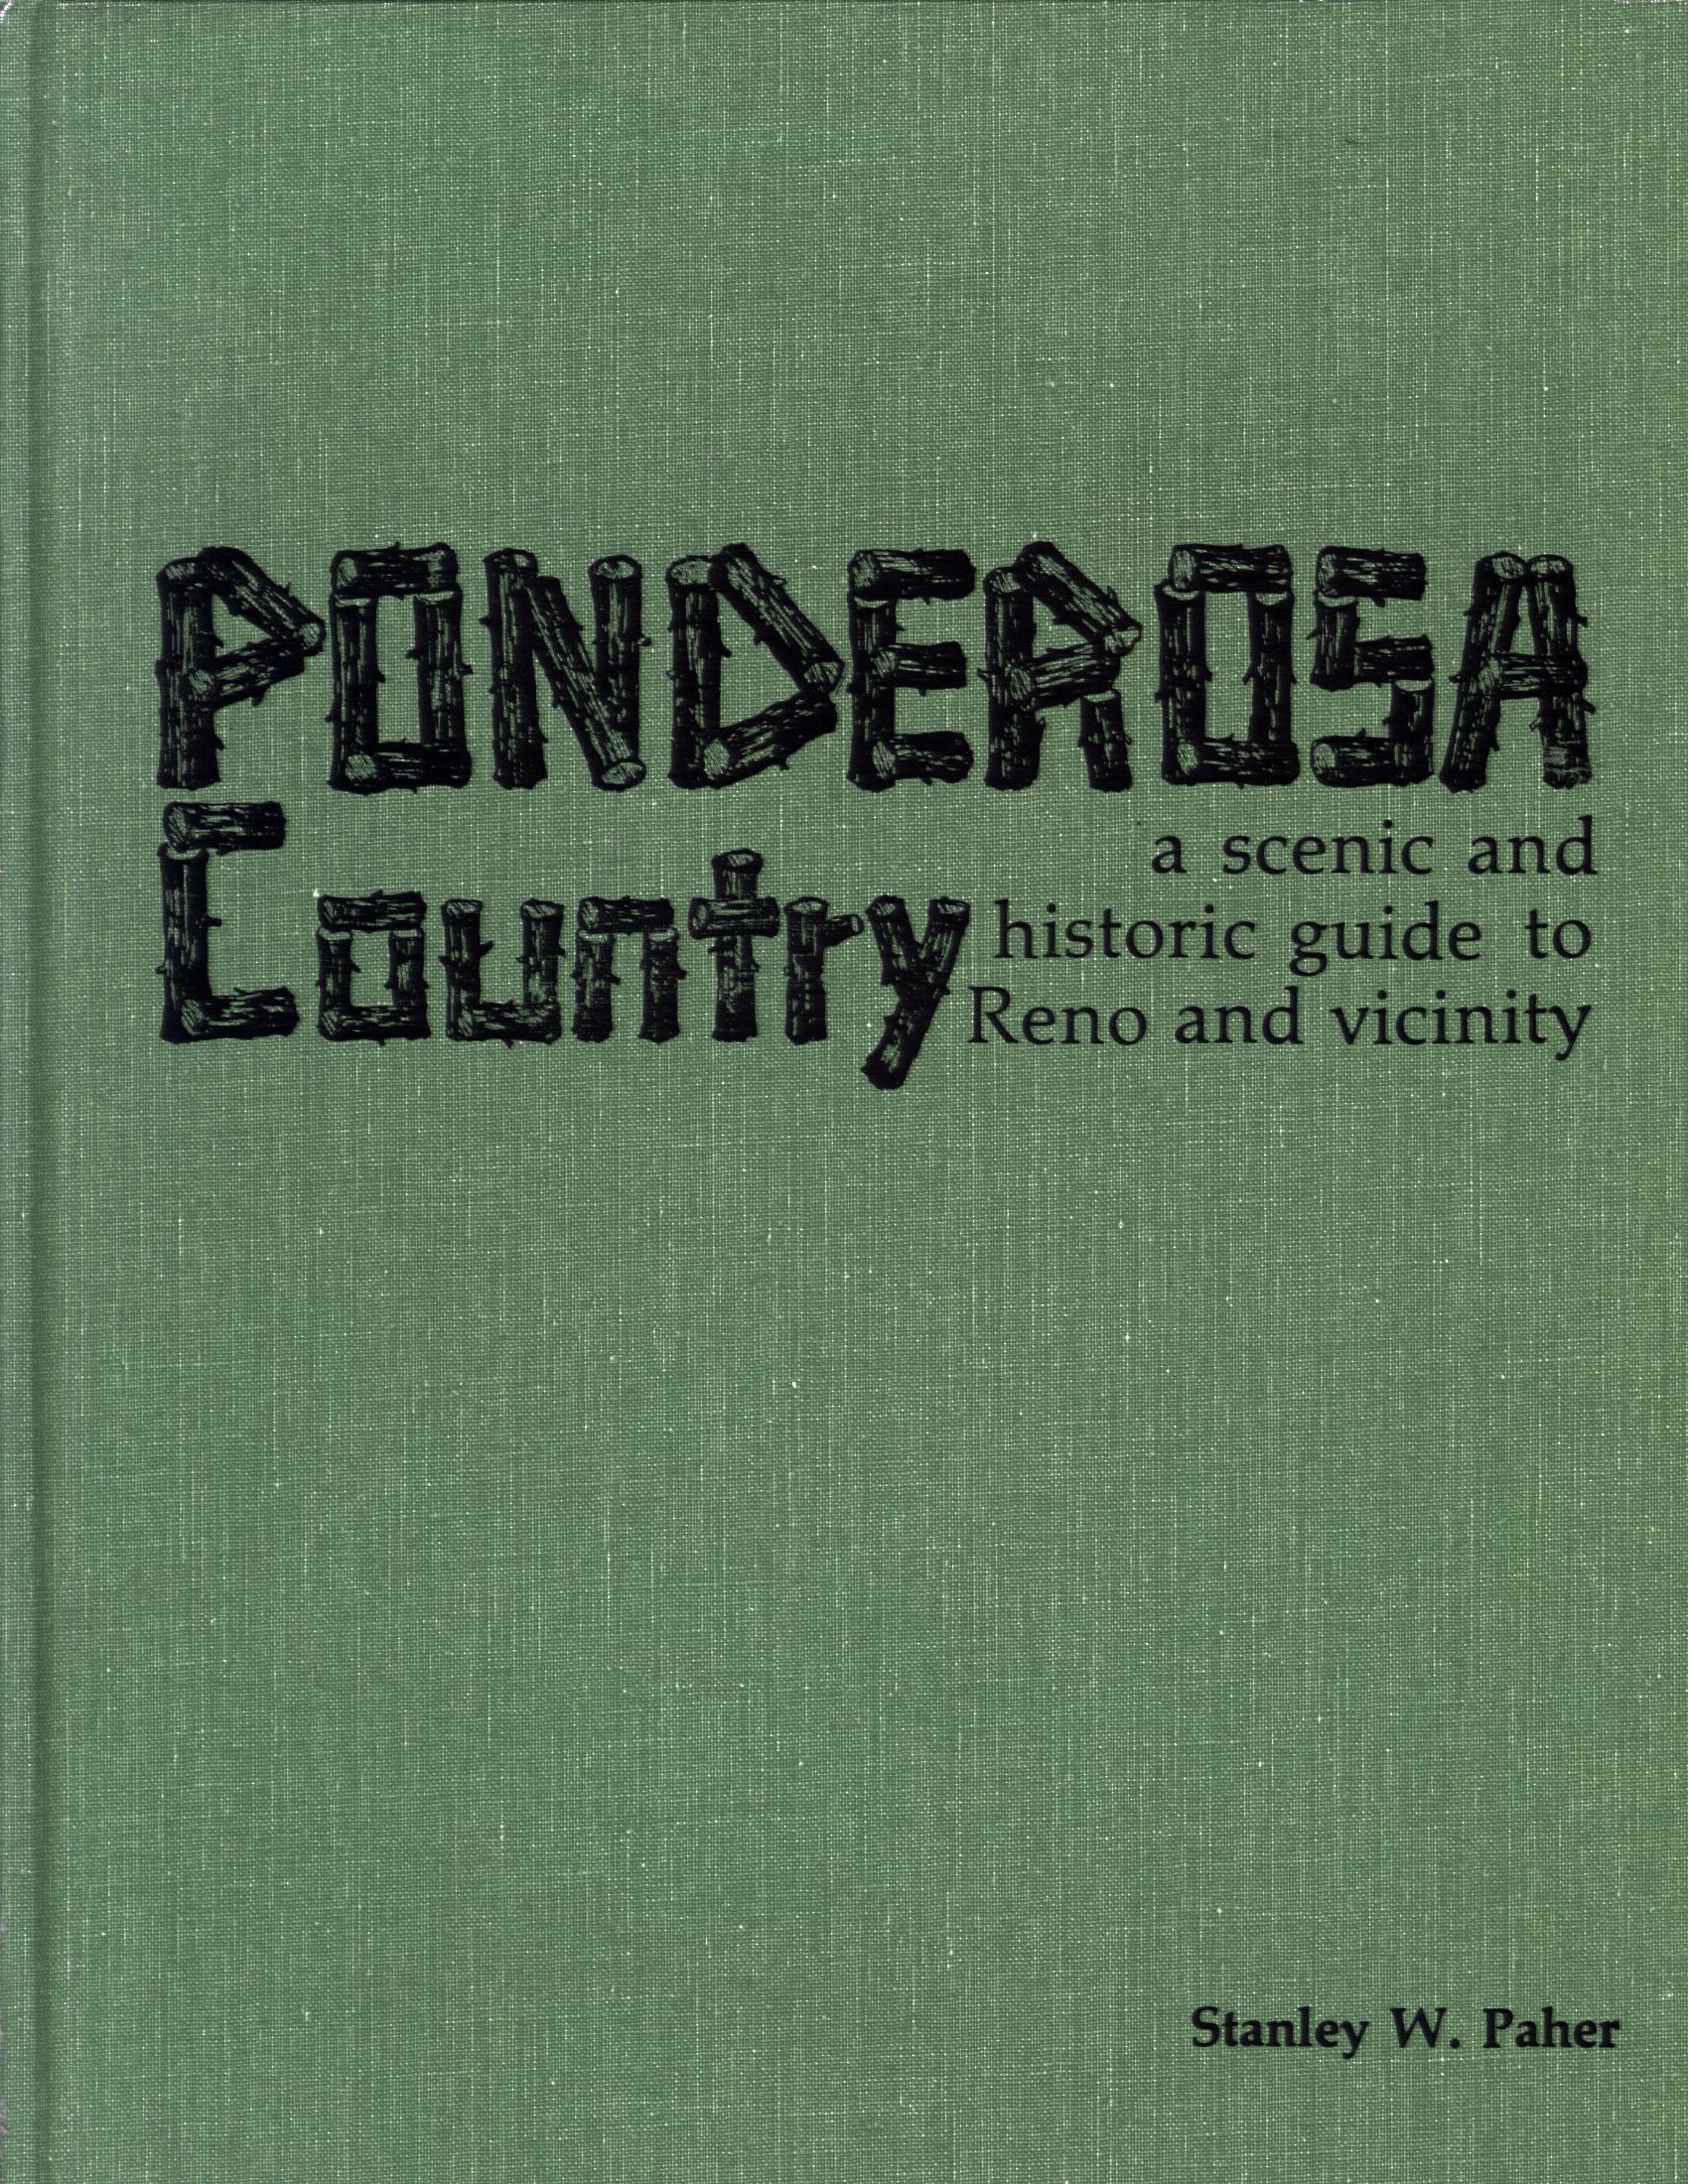 PONDEROSA COUNTRY: a scenic and historic guide to Reno and vicinity (NV). 